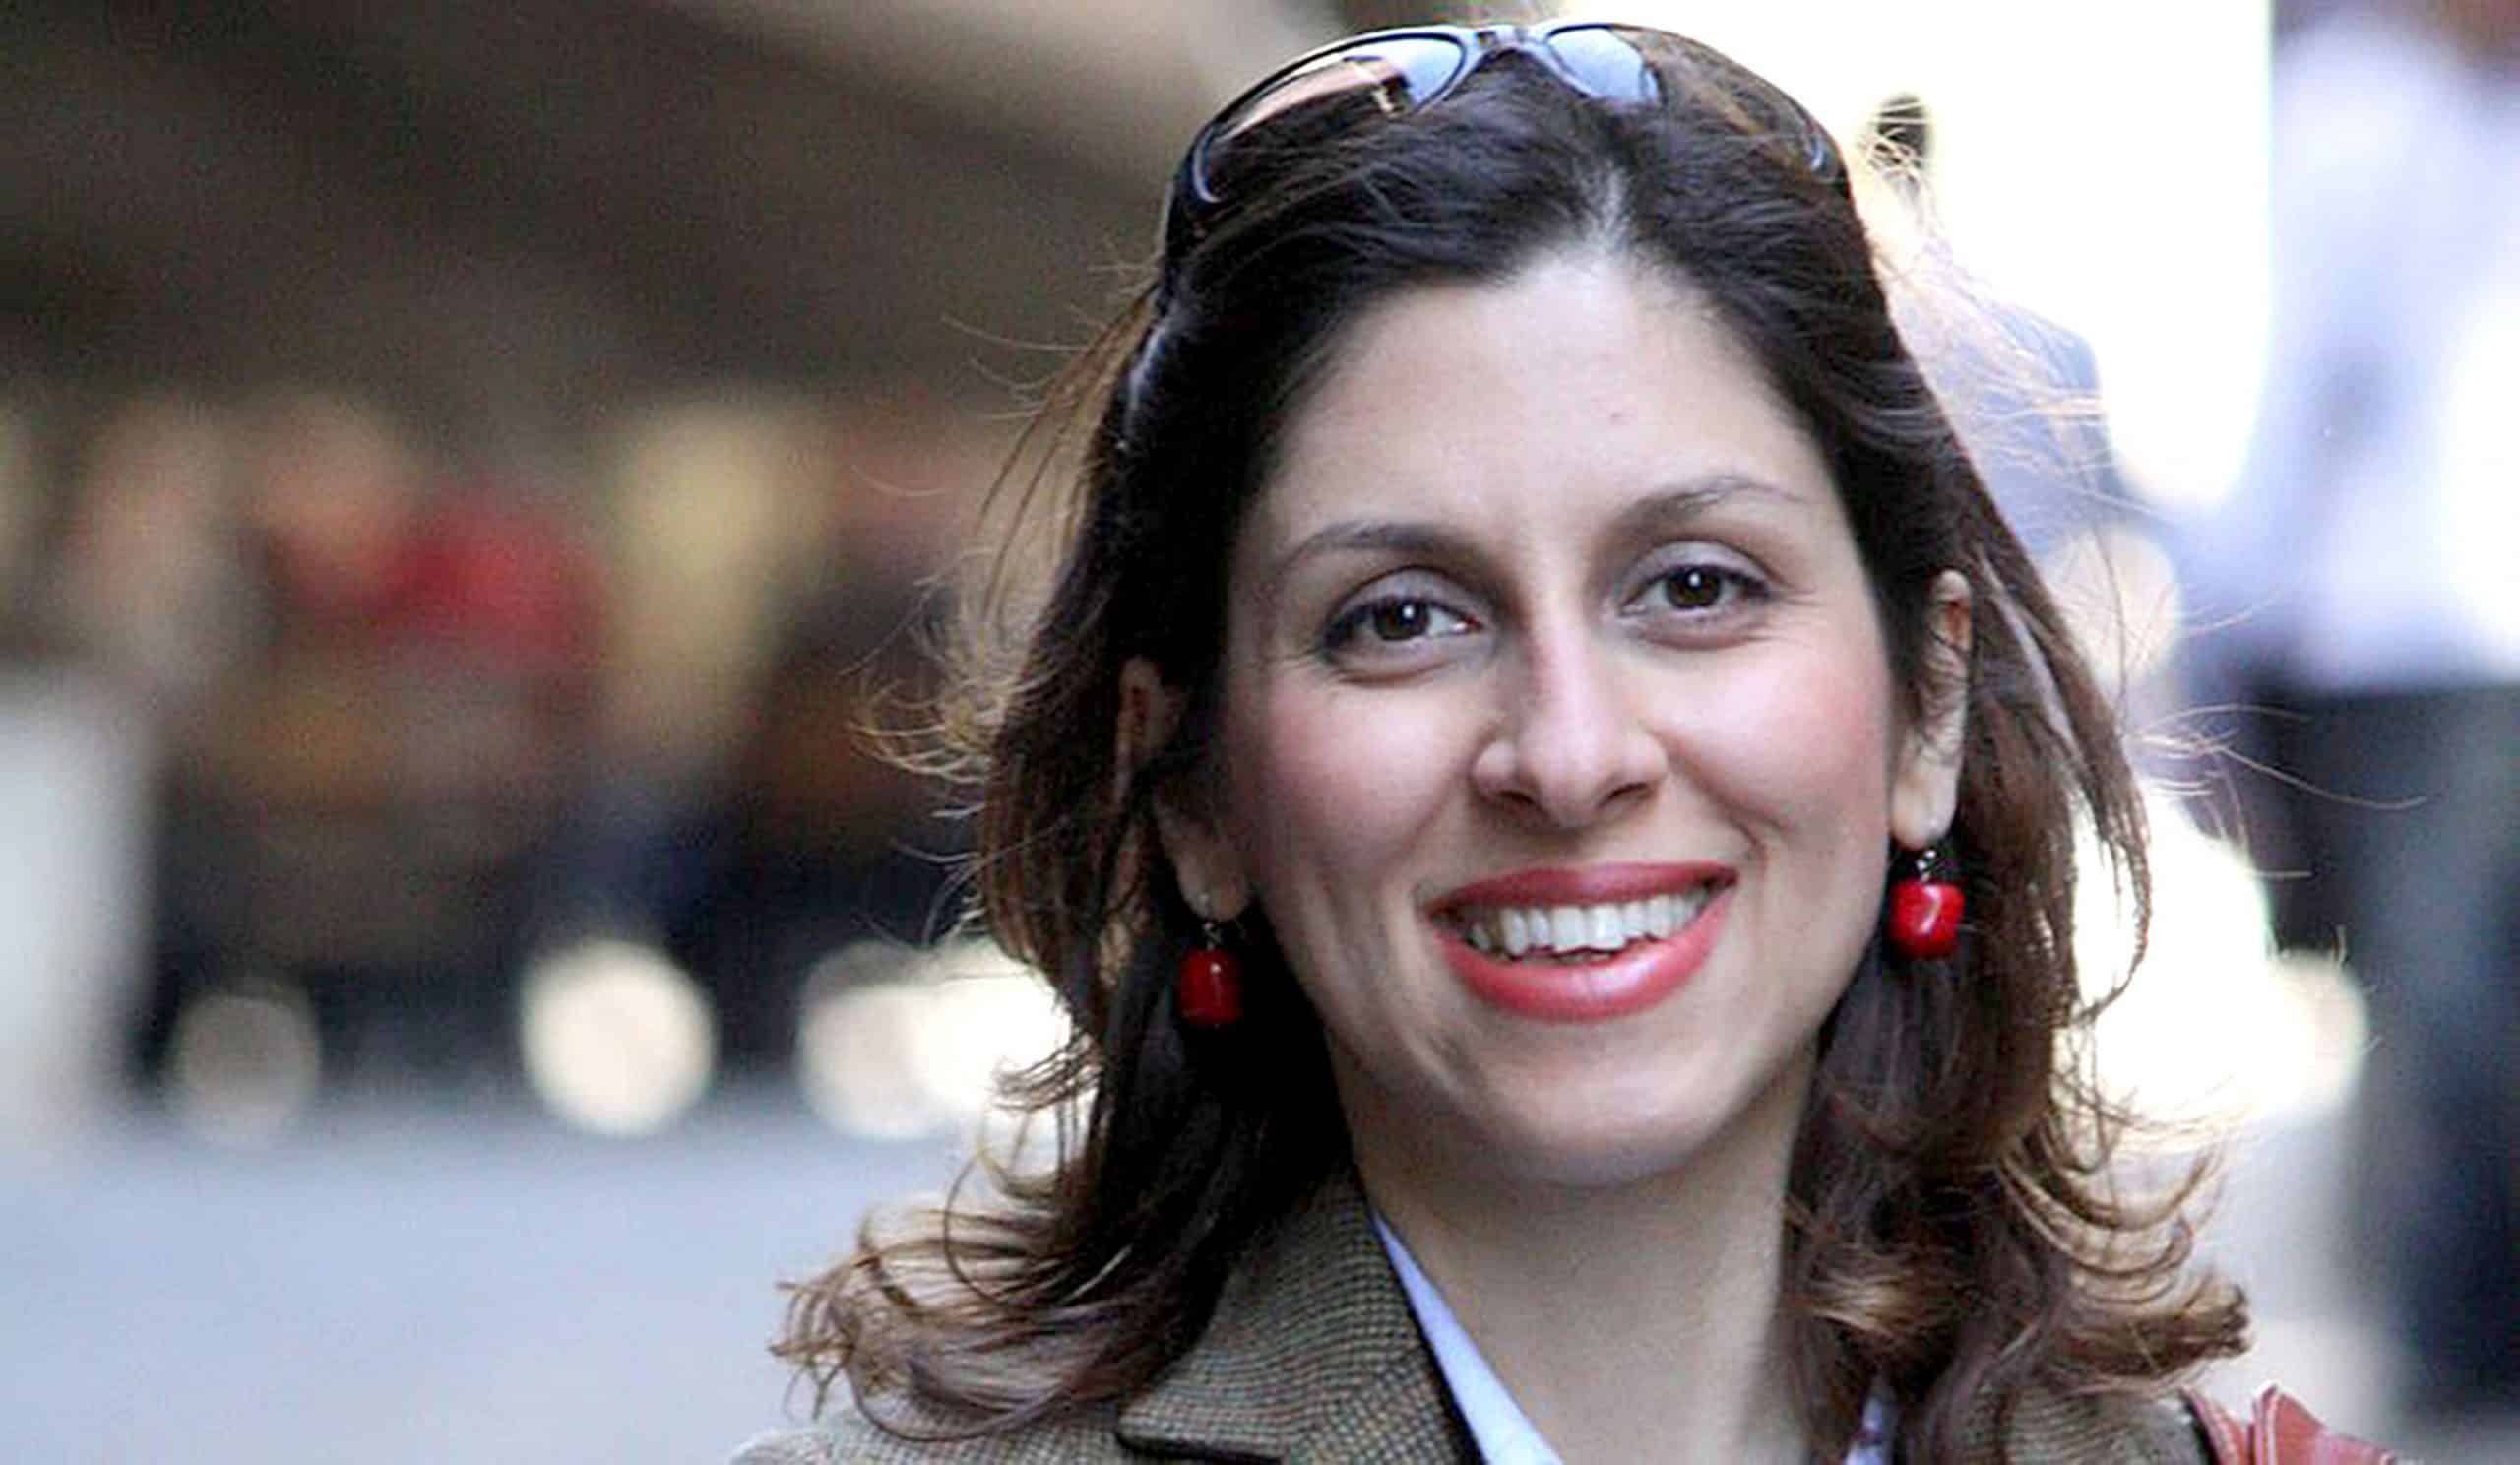 Nazanin Zaghari-Ratcliffe freed – but may face new charges in Iran